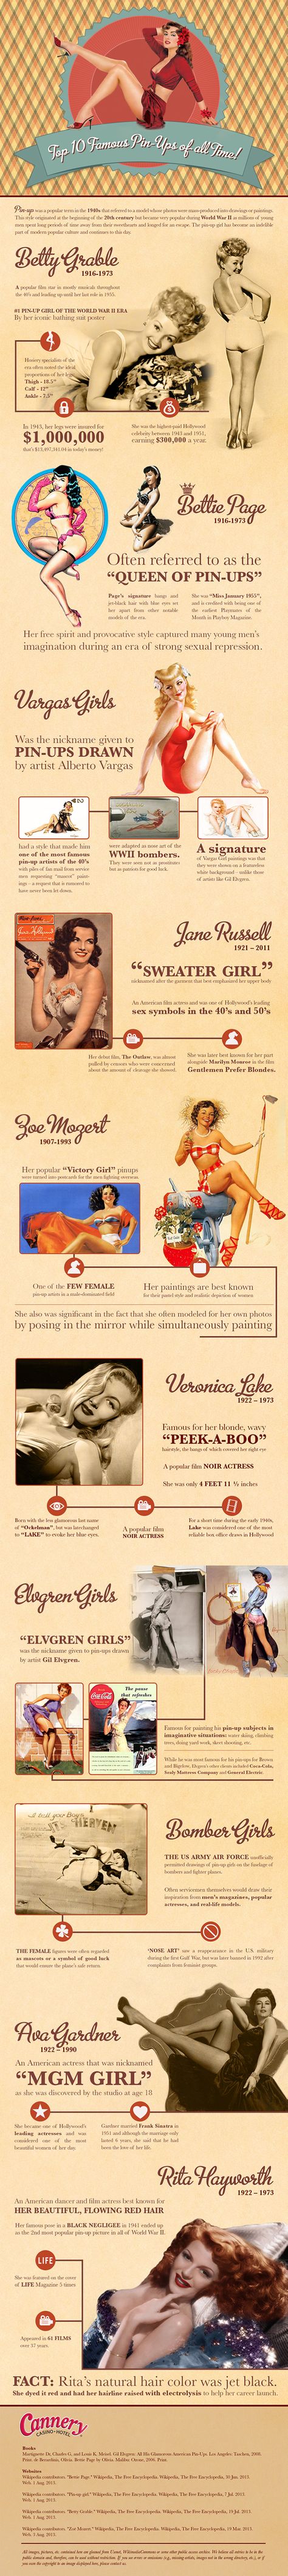 In the 1940’s, thousands of American soldiers were overseas fighting in World War II. This gruesome war throughout Europe and the Pacific was draini Arte Pin Up, Pin Up Poses, Pin Up Vintage, Estilo Pin Up, Gil Elvgren, Pin Up Photos, Modern Pin Up, Pinup Art, Pin Up Models